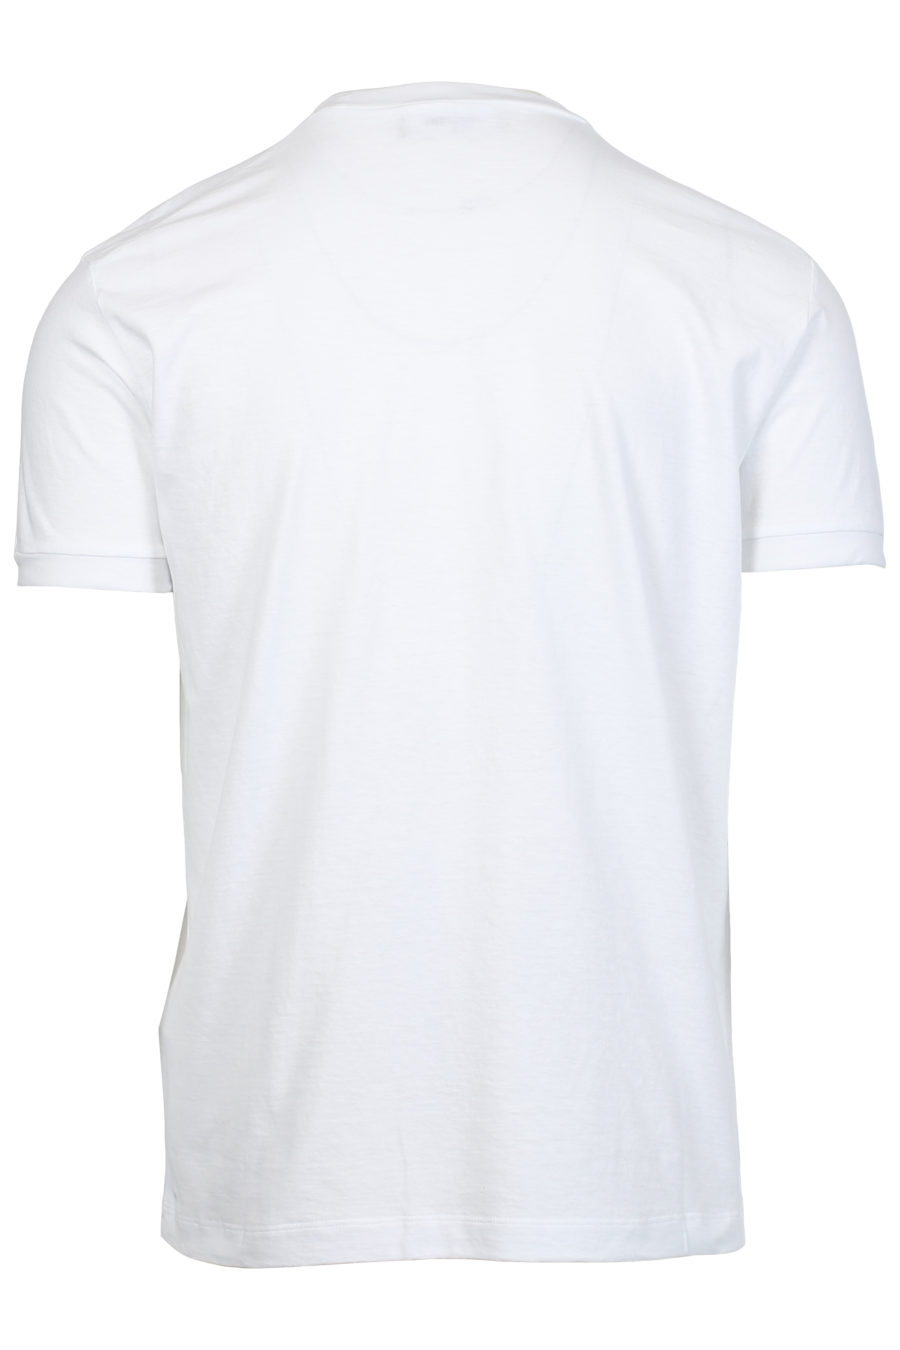 White T-shirt with small print - IMG 2396 1